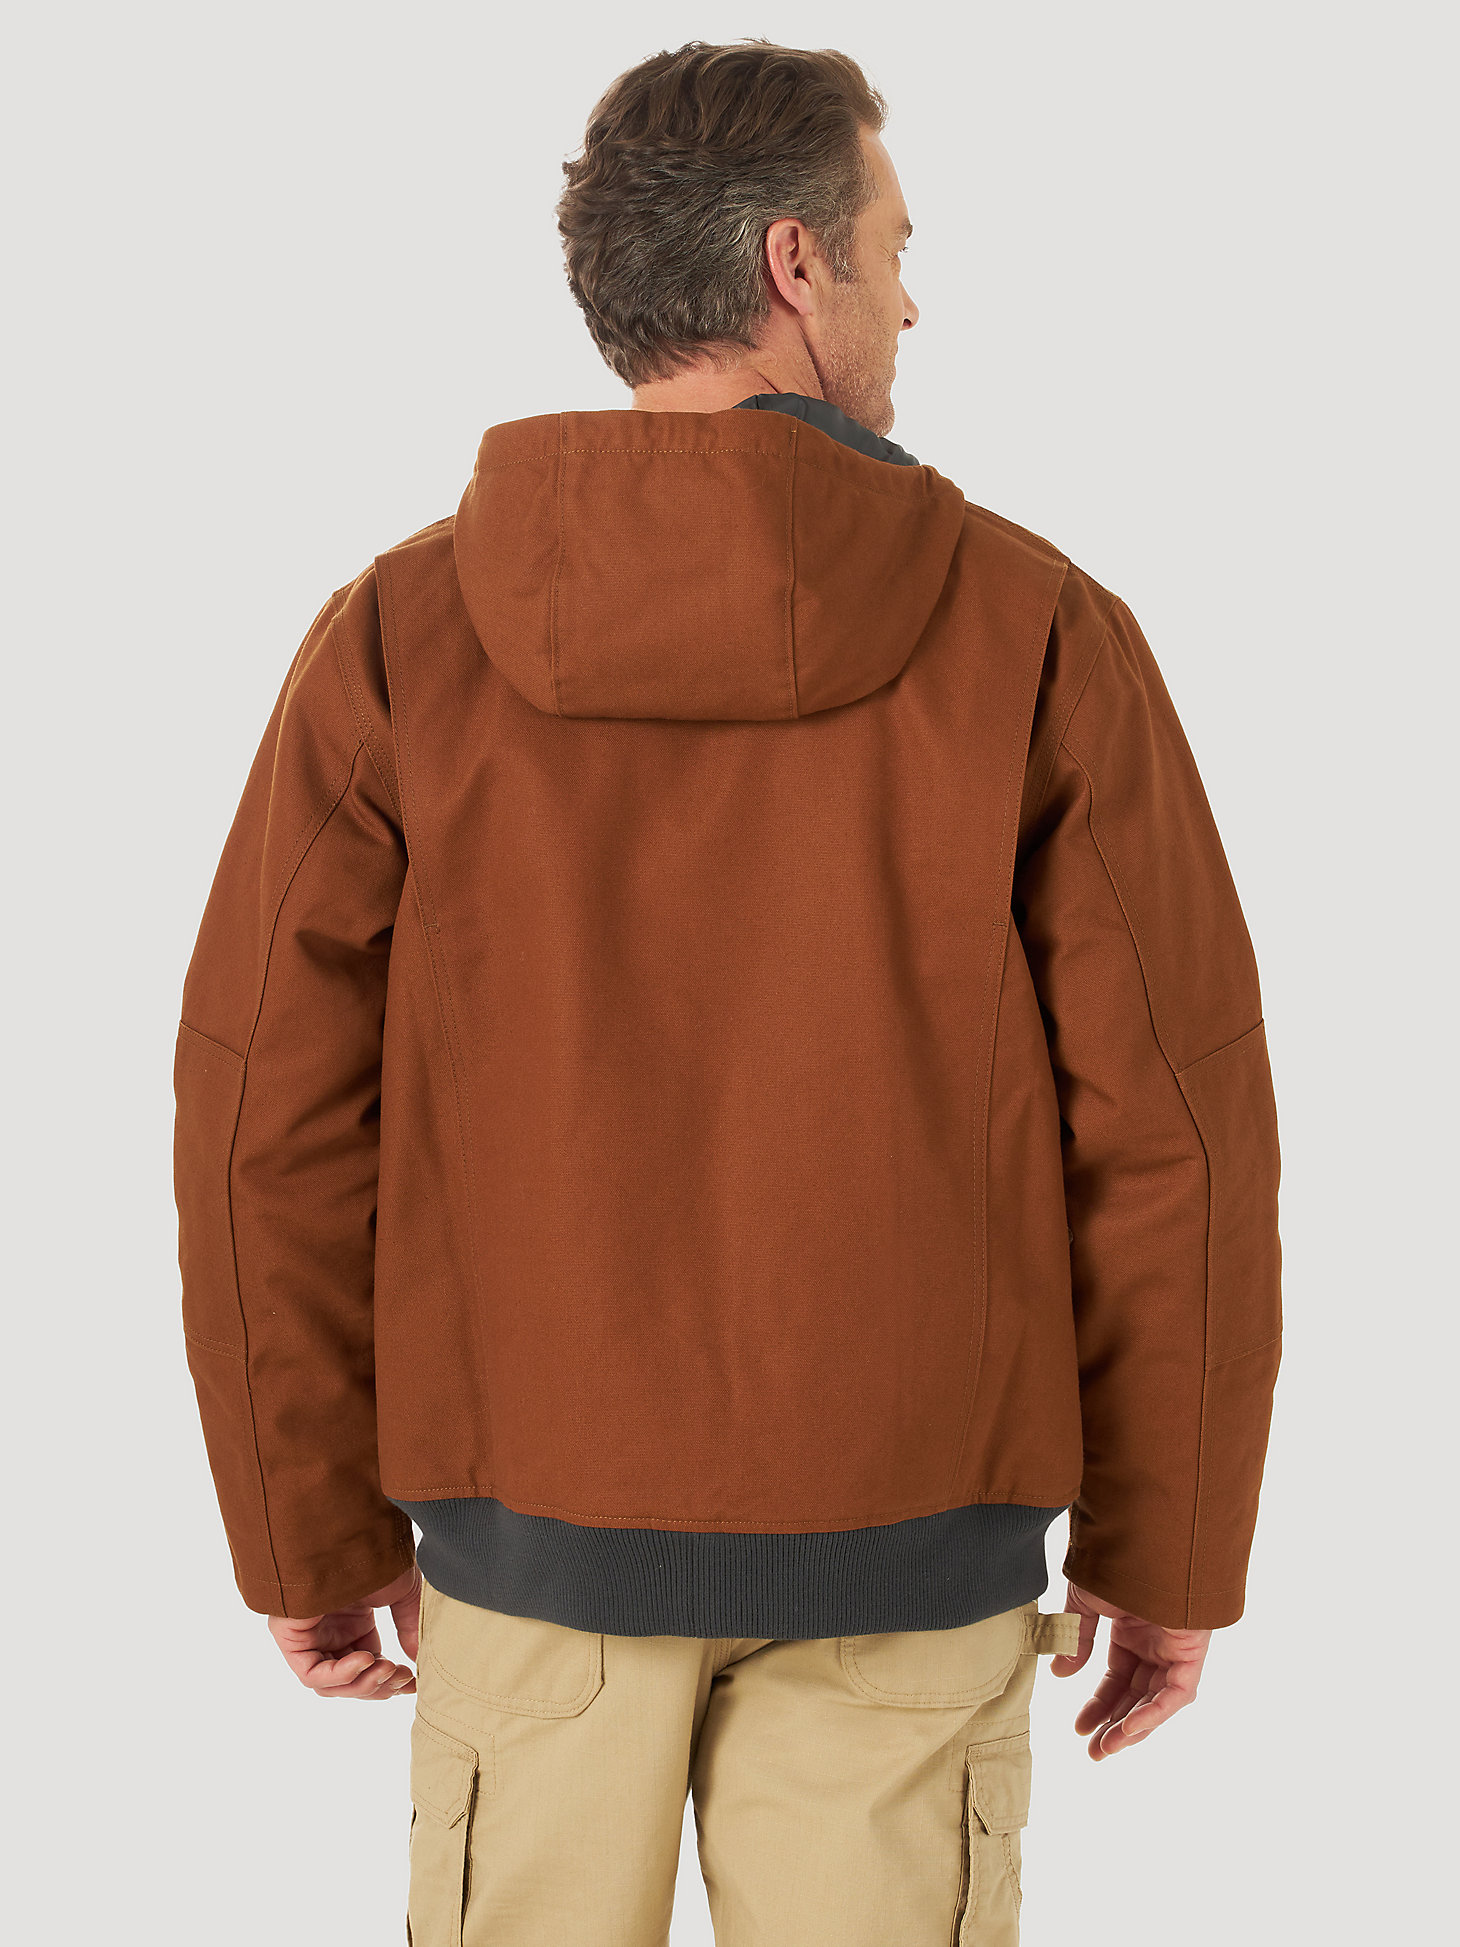 Wrangler® RIGGS Workwear® Tough Layers Insulated Canvas Work Jacket in Toffee alternative view 1